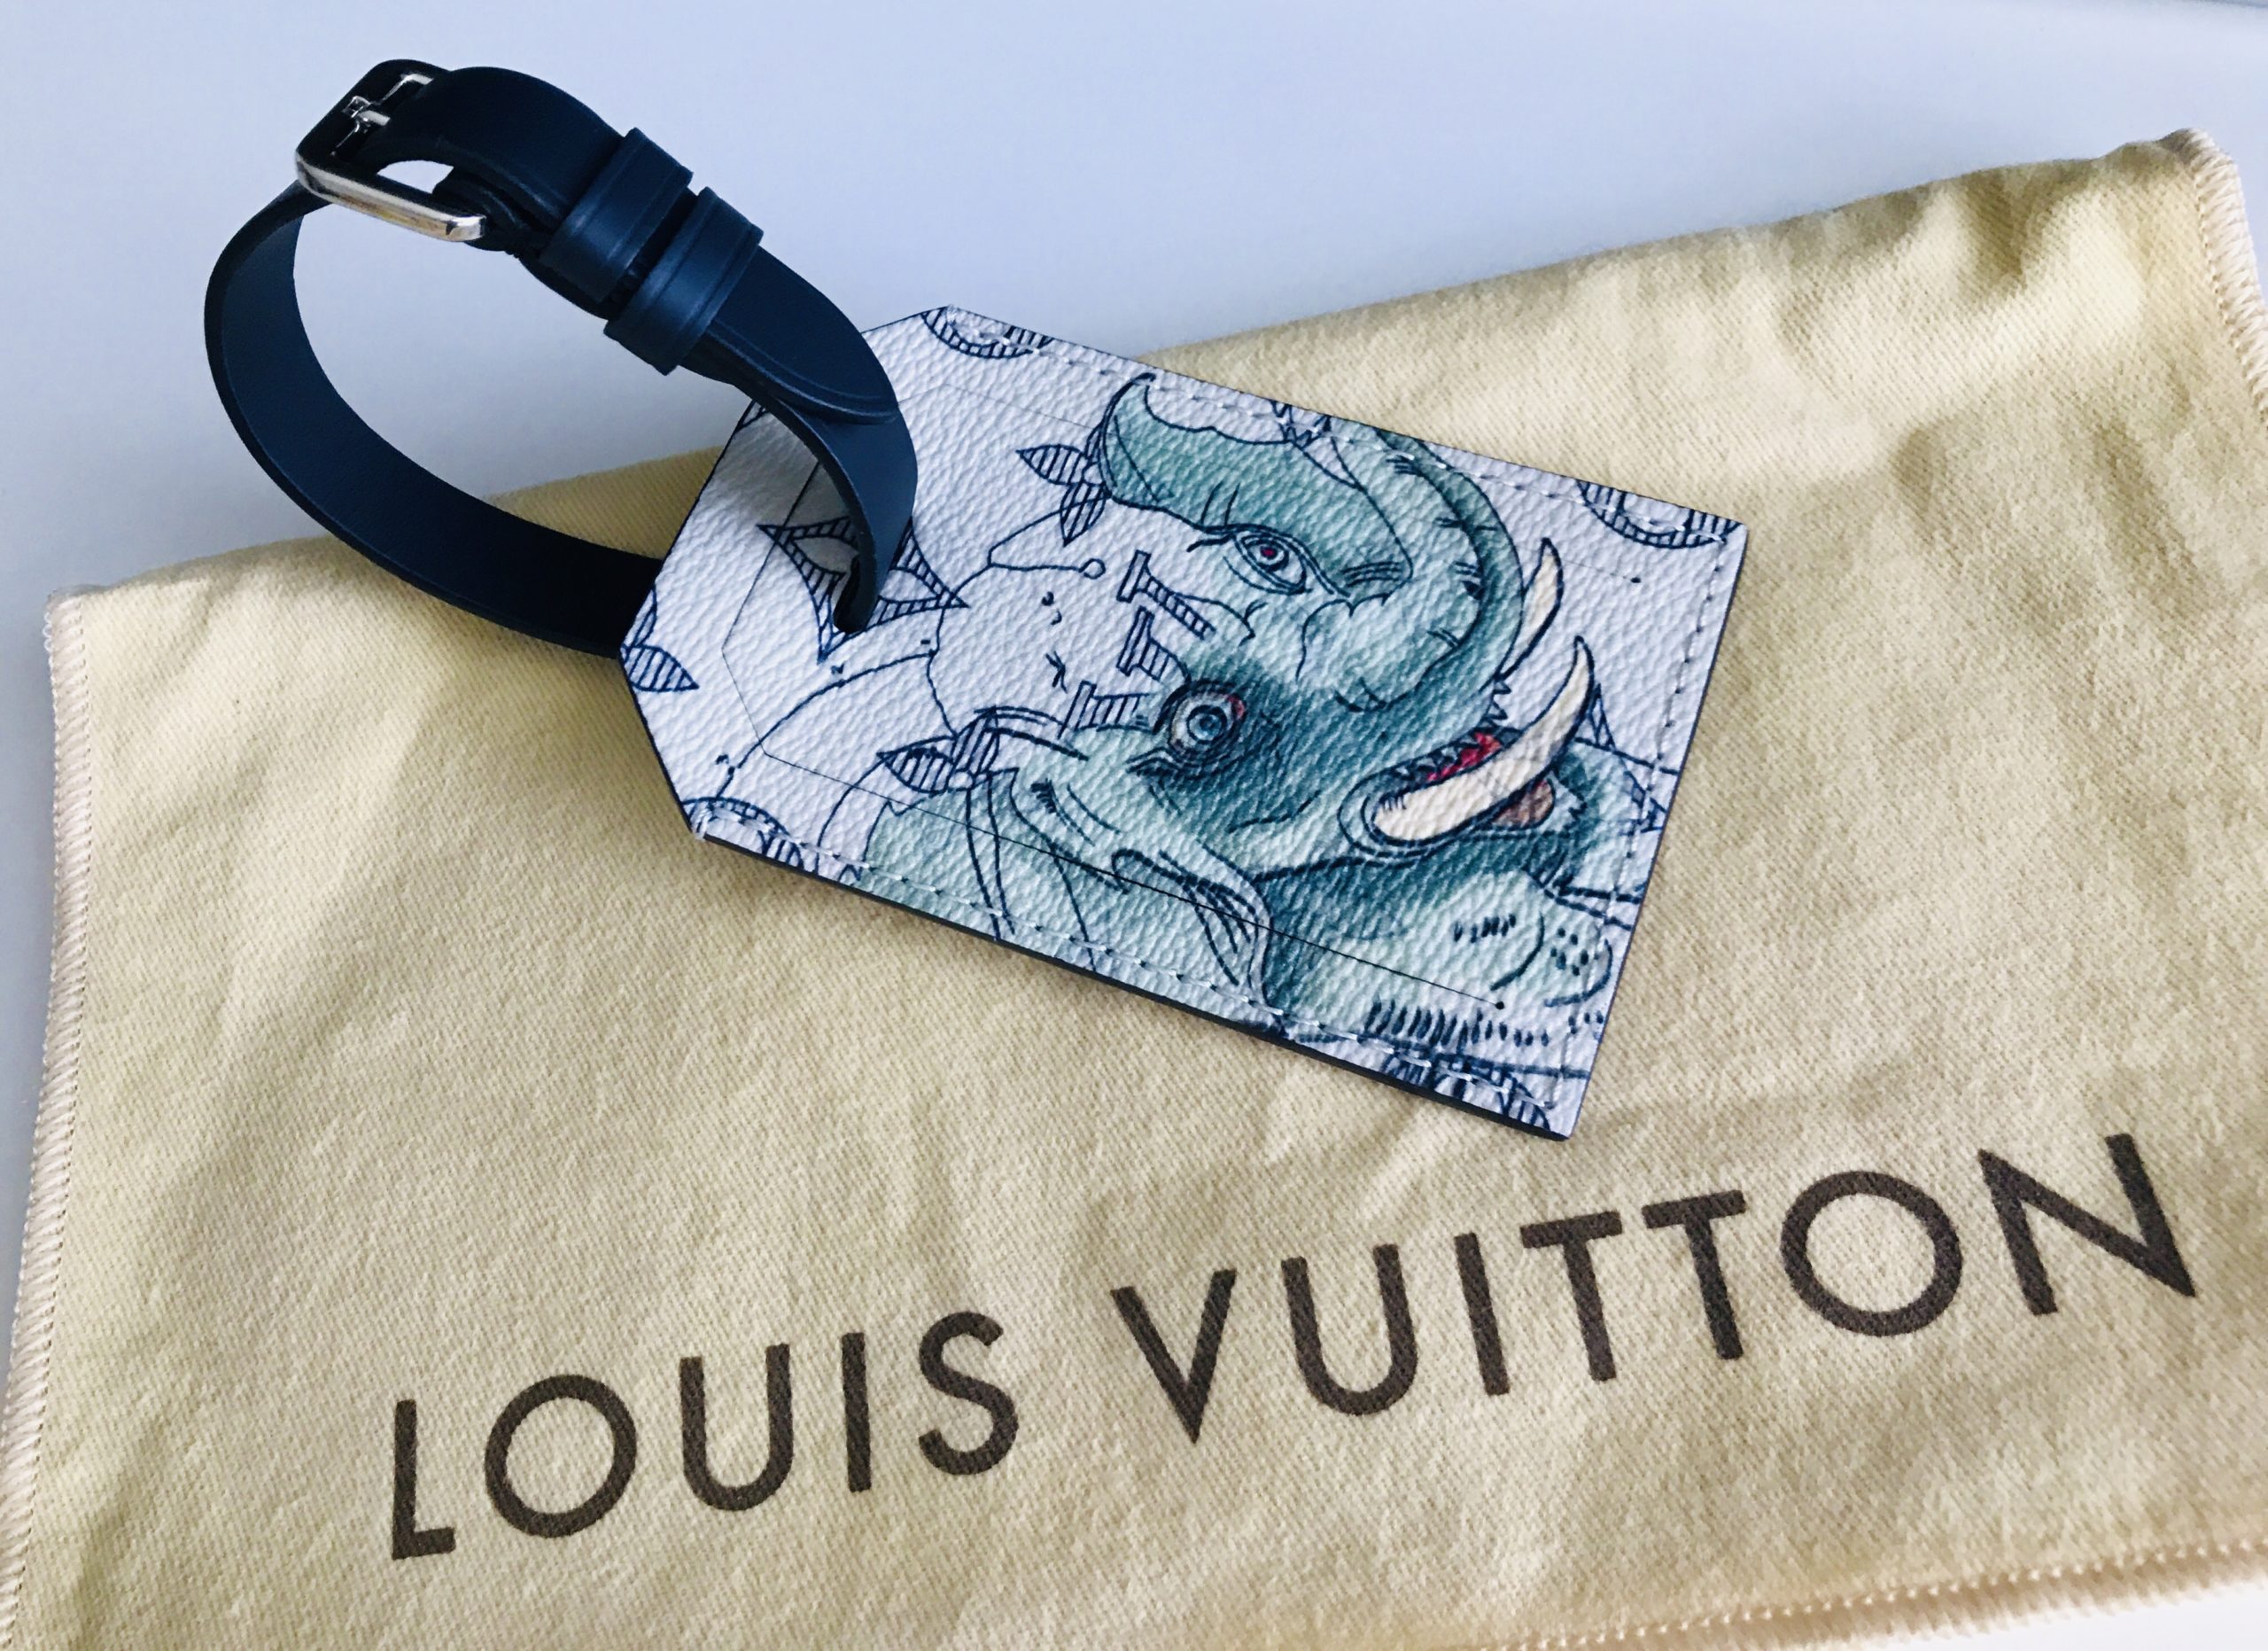 White Elephant Consignment - New deadstock Louis Vuitton Double Sided  Hunting Bag / Travel Bag in Mint Condition! #louisvuitton  #louisvuittontravelbag #hunter #consignmentboutique #designer  #designerresale